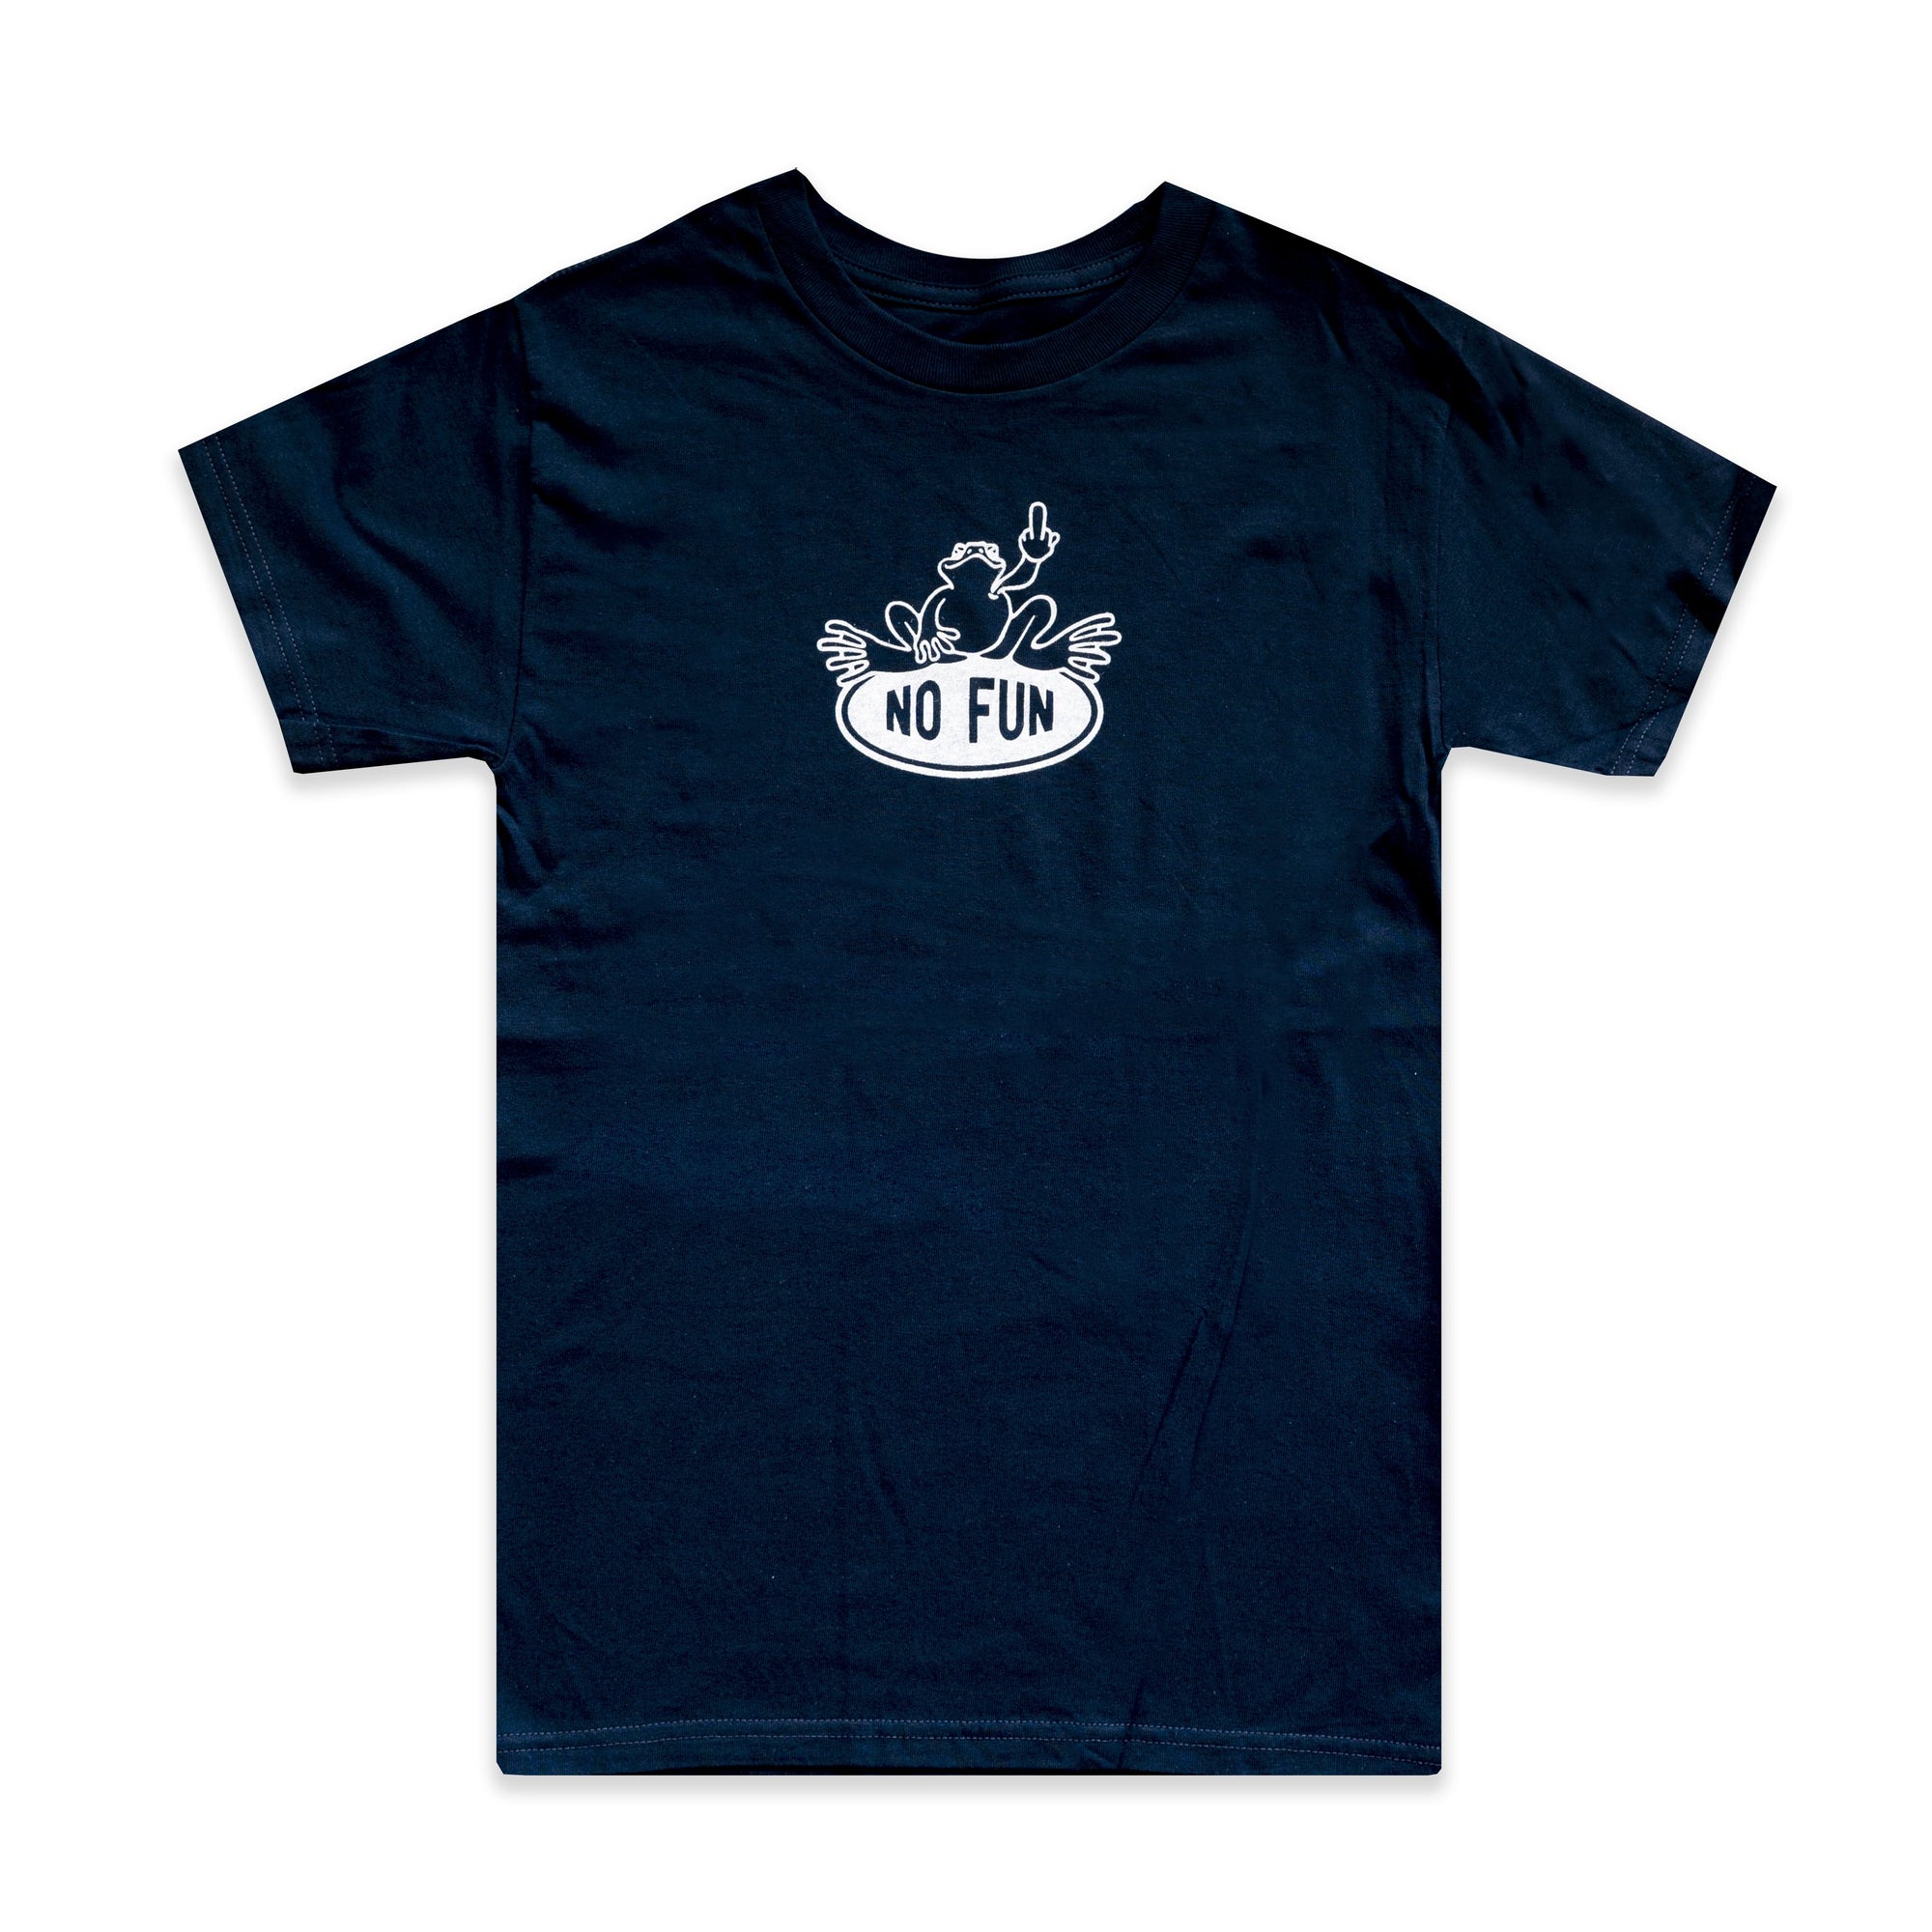 Navy t-shirt with print of frog giving the middle finger. Frog is sitting on an oval No Fun® logo.